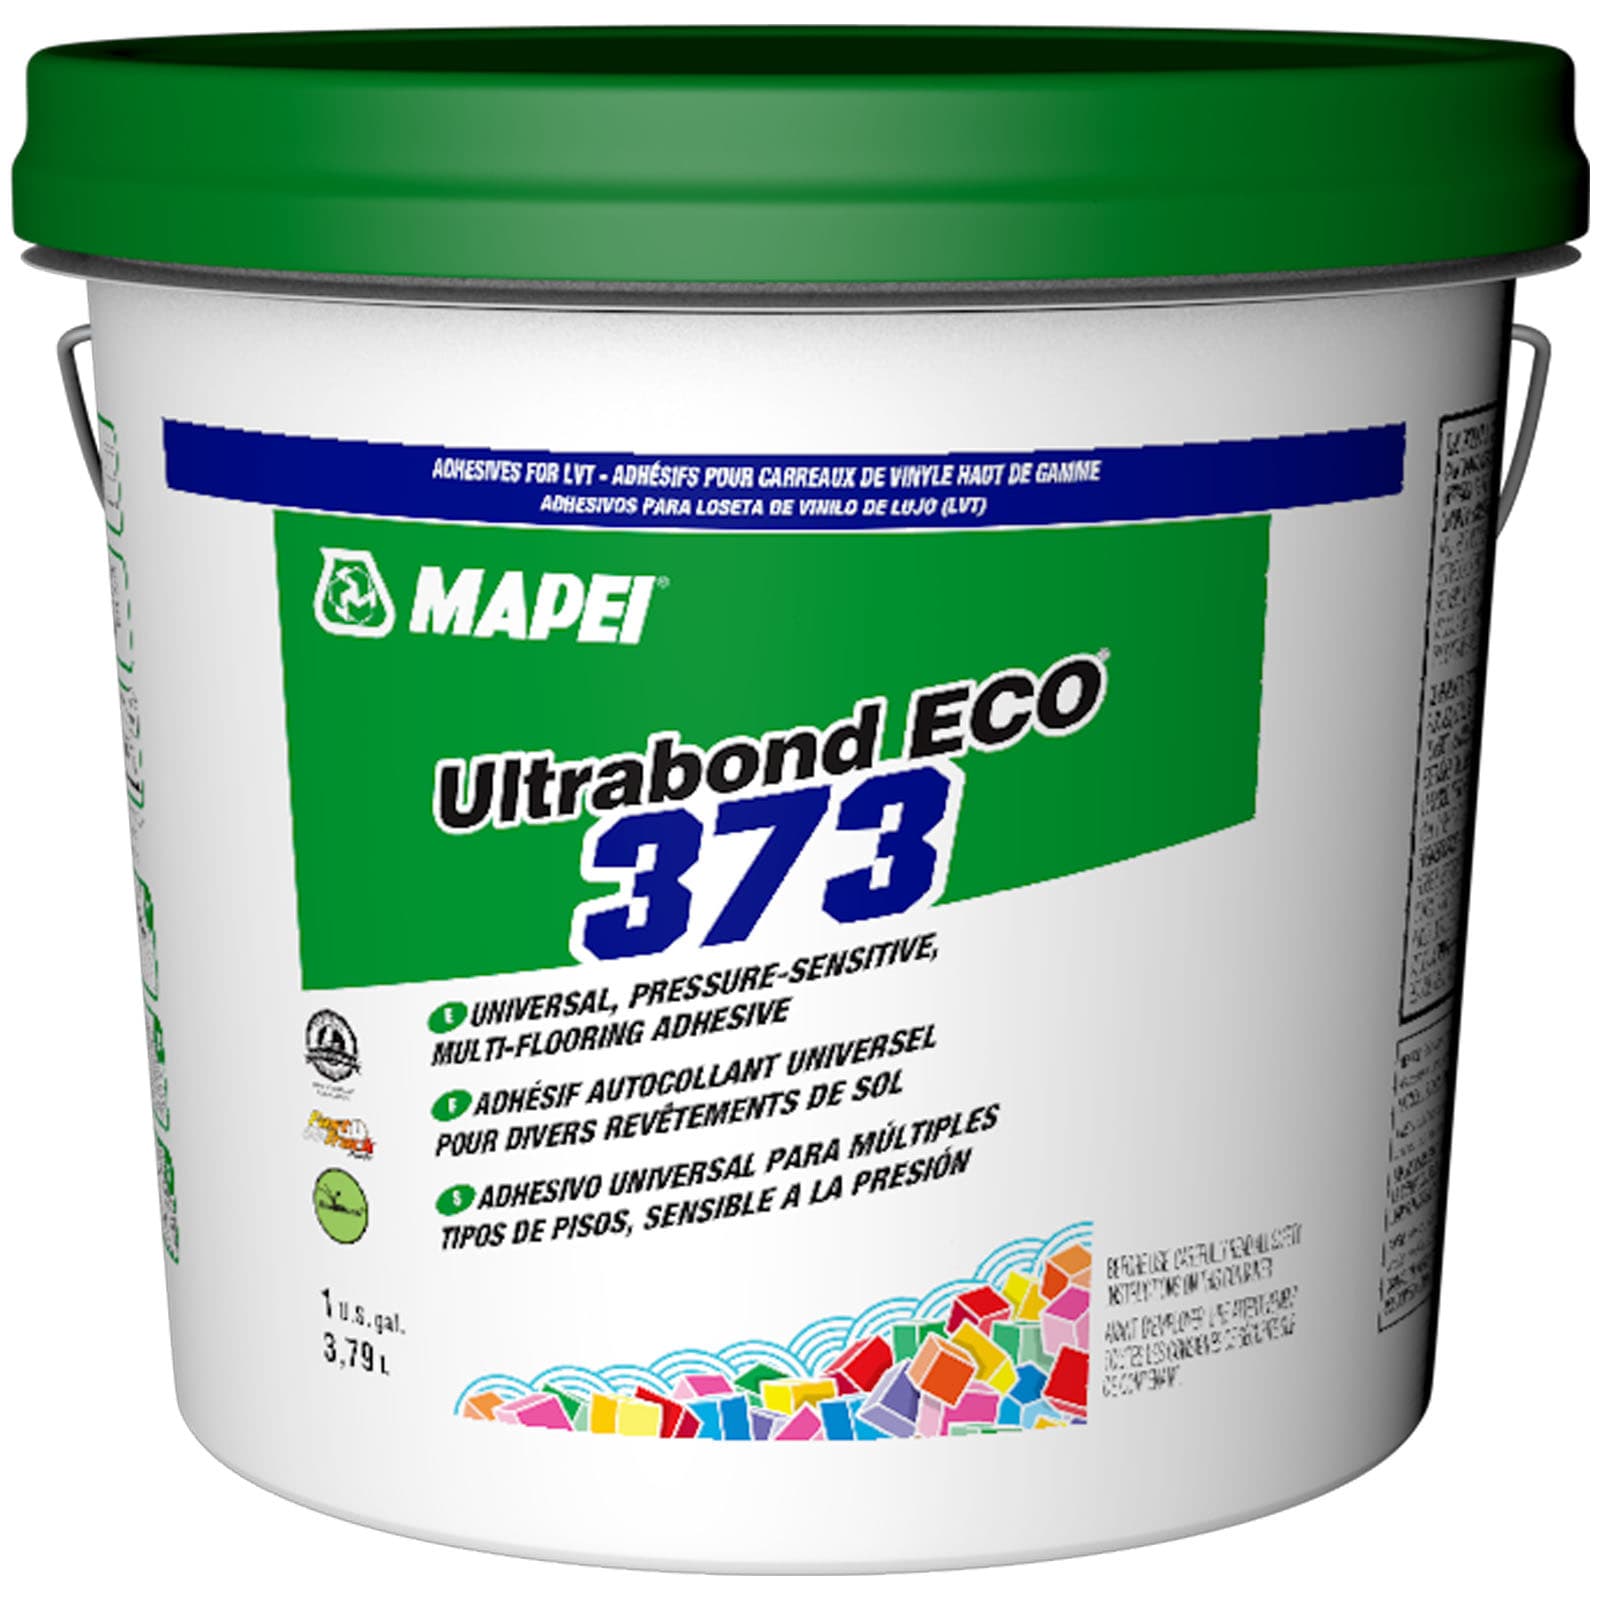 MAPEI® Ultrabond Eco® 360 Adhesive for Vinyl Sheets, Tile and Plank